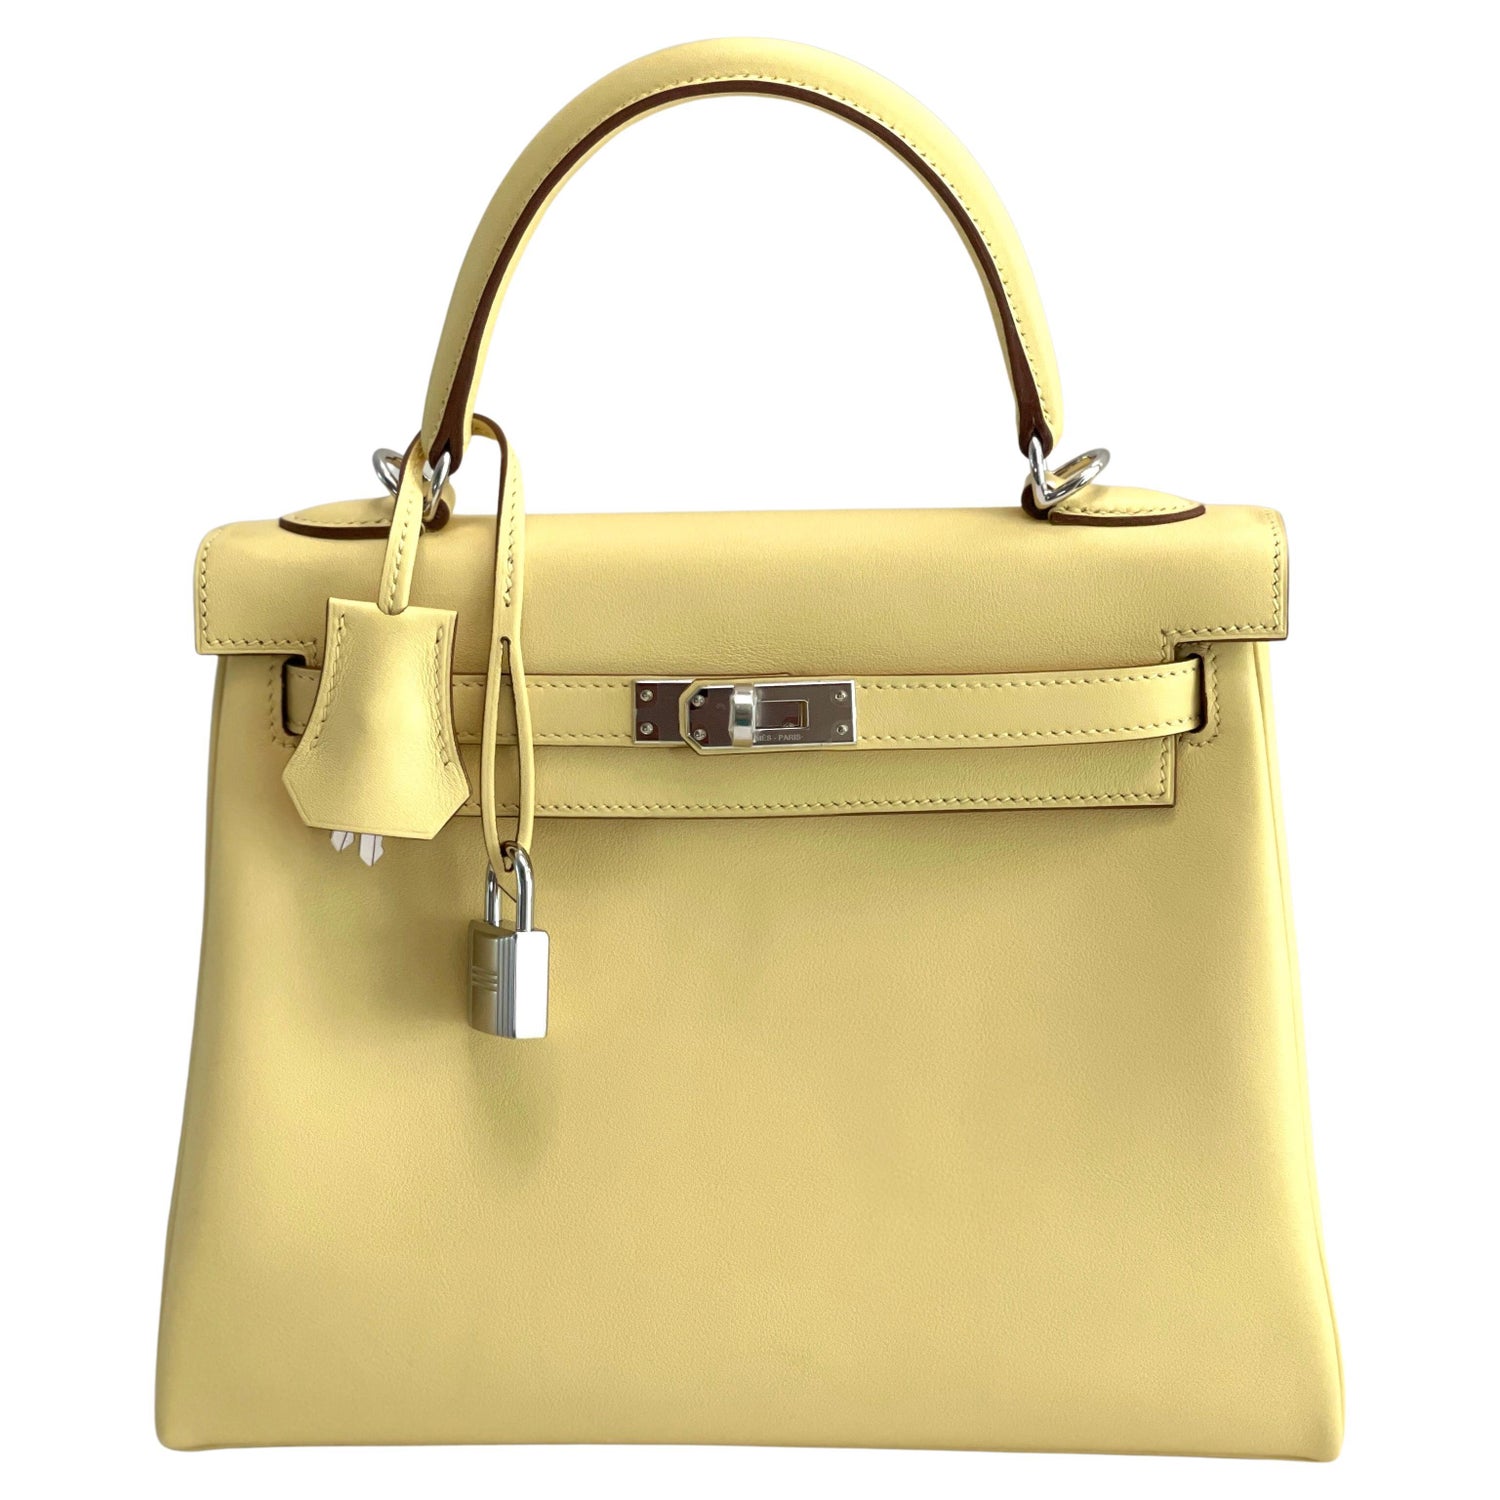 Hermes Kelly Jaune Poussin - For Sale on 1stDibs